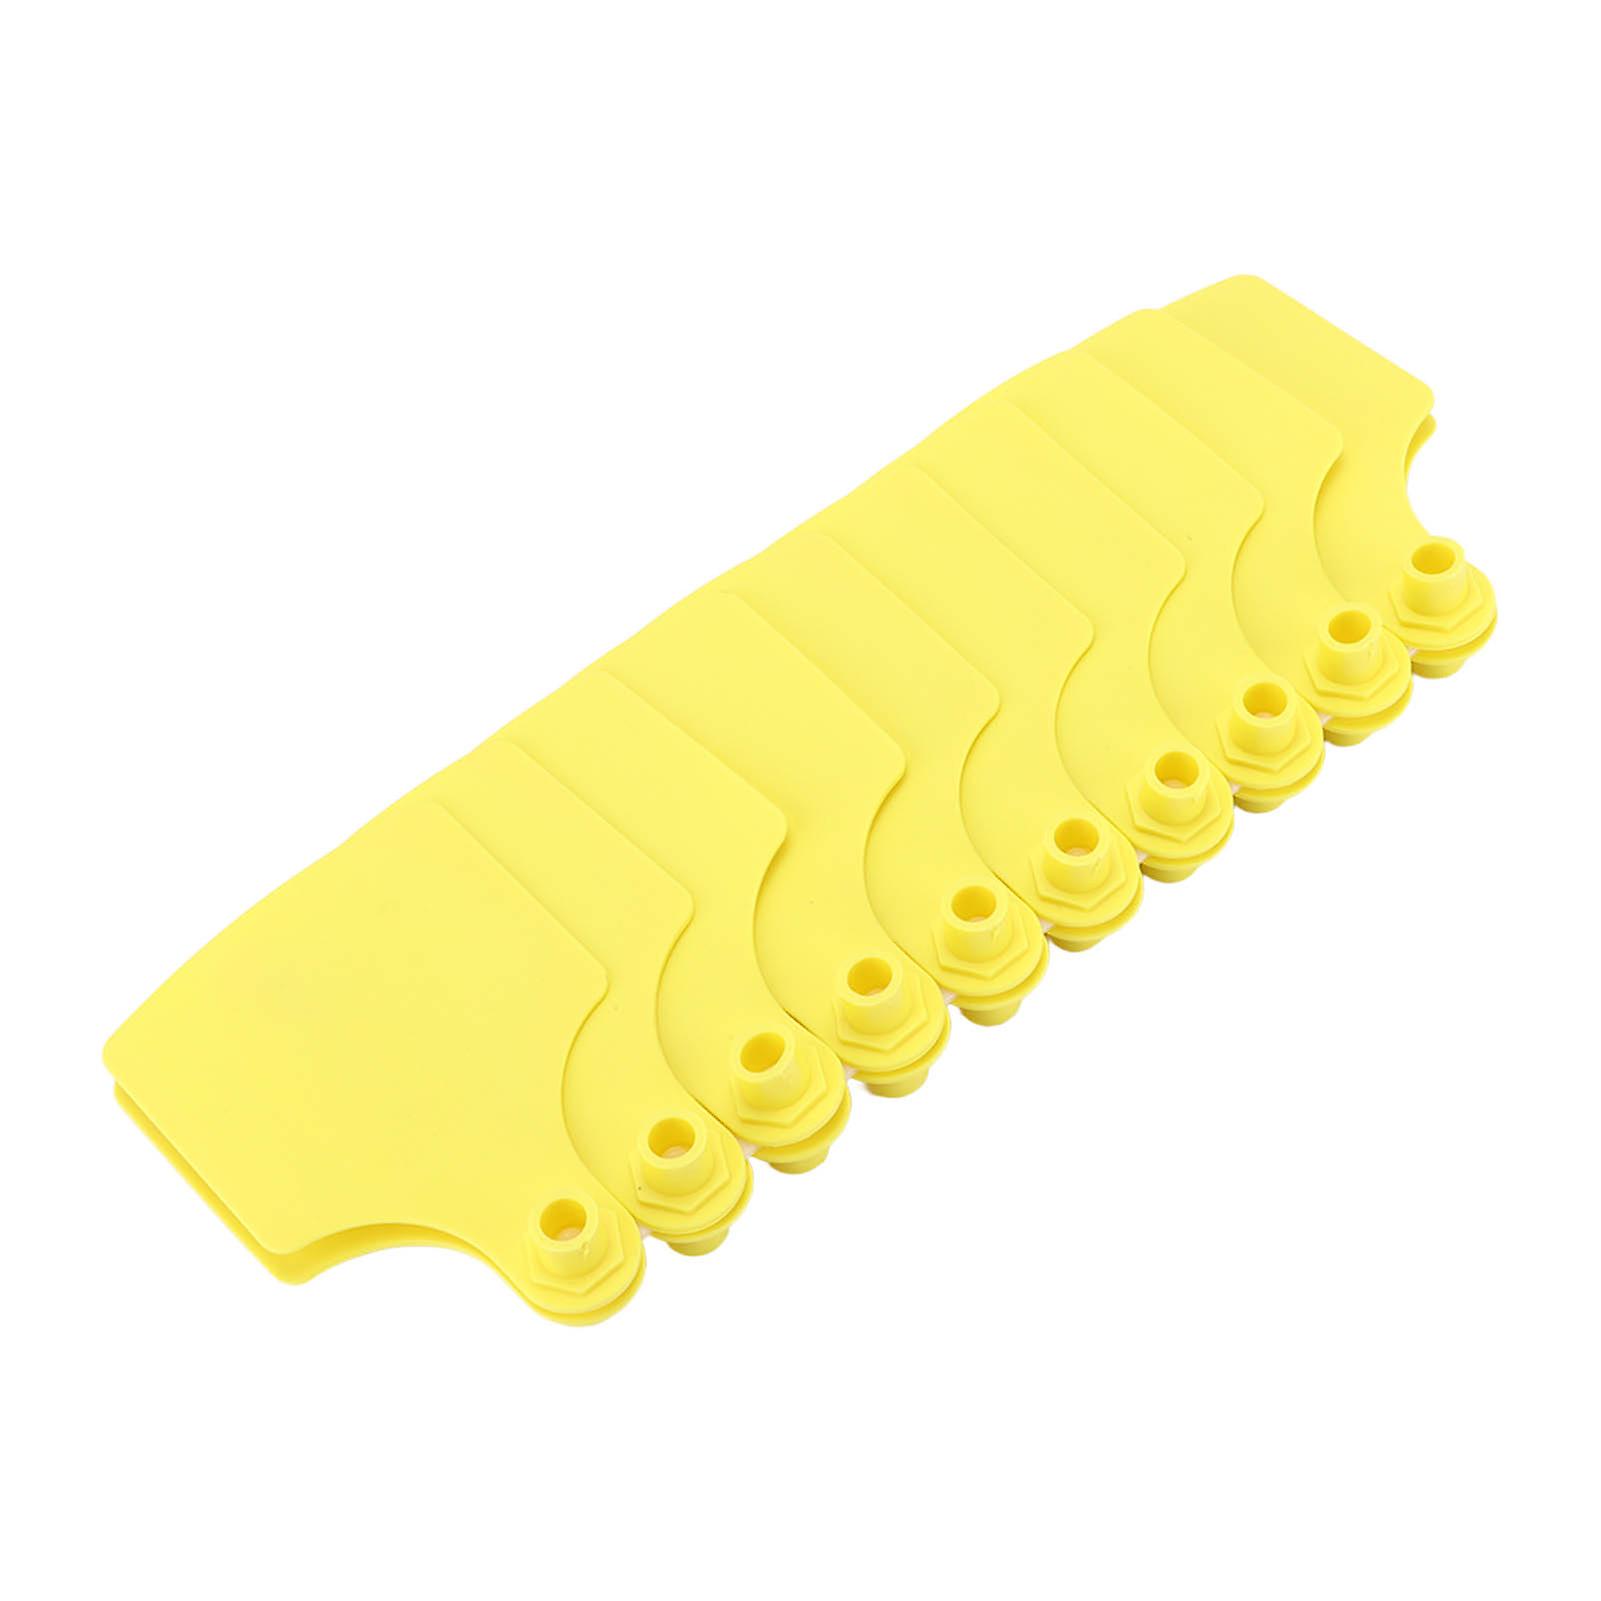 100 Set Plastic Livestock Ear Tag Blank Animal Tag For Marking Cattle Cows Animal Farm Accessories